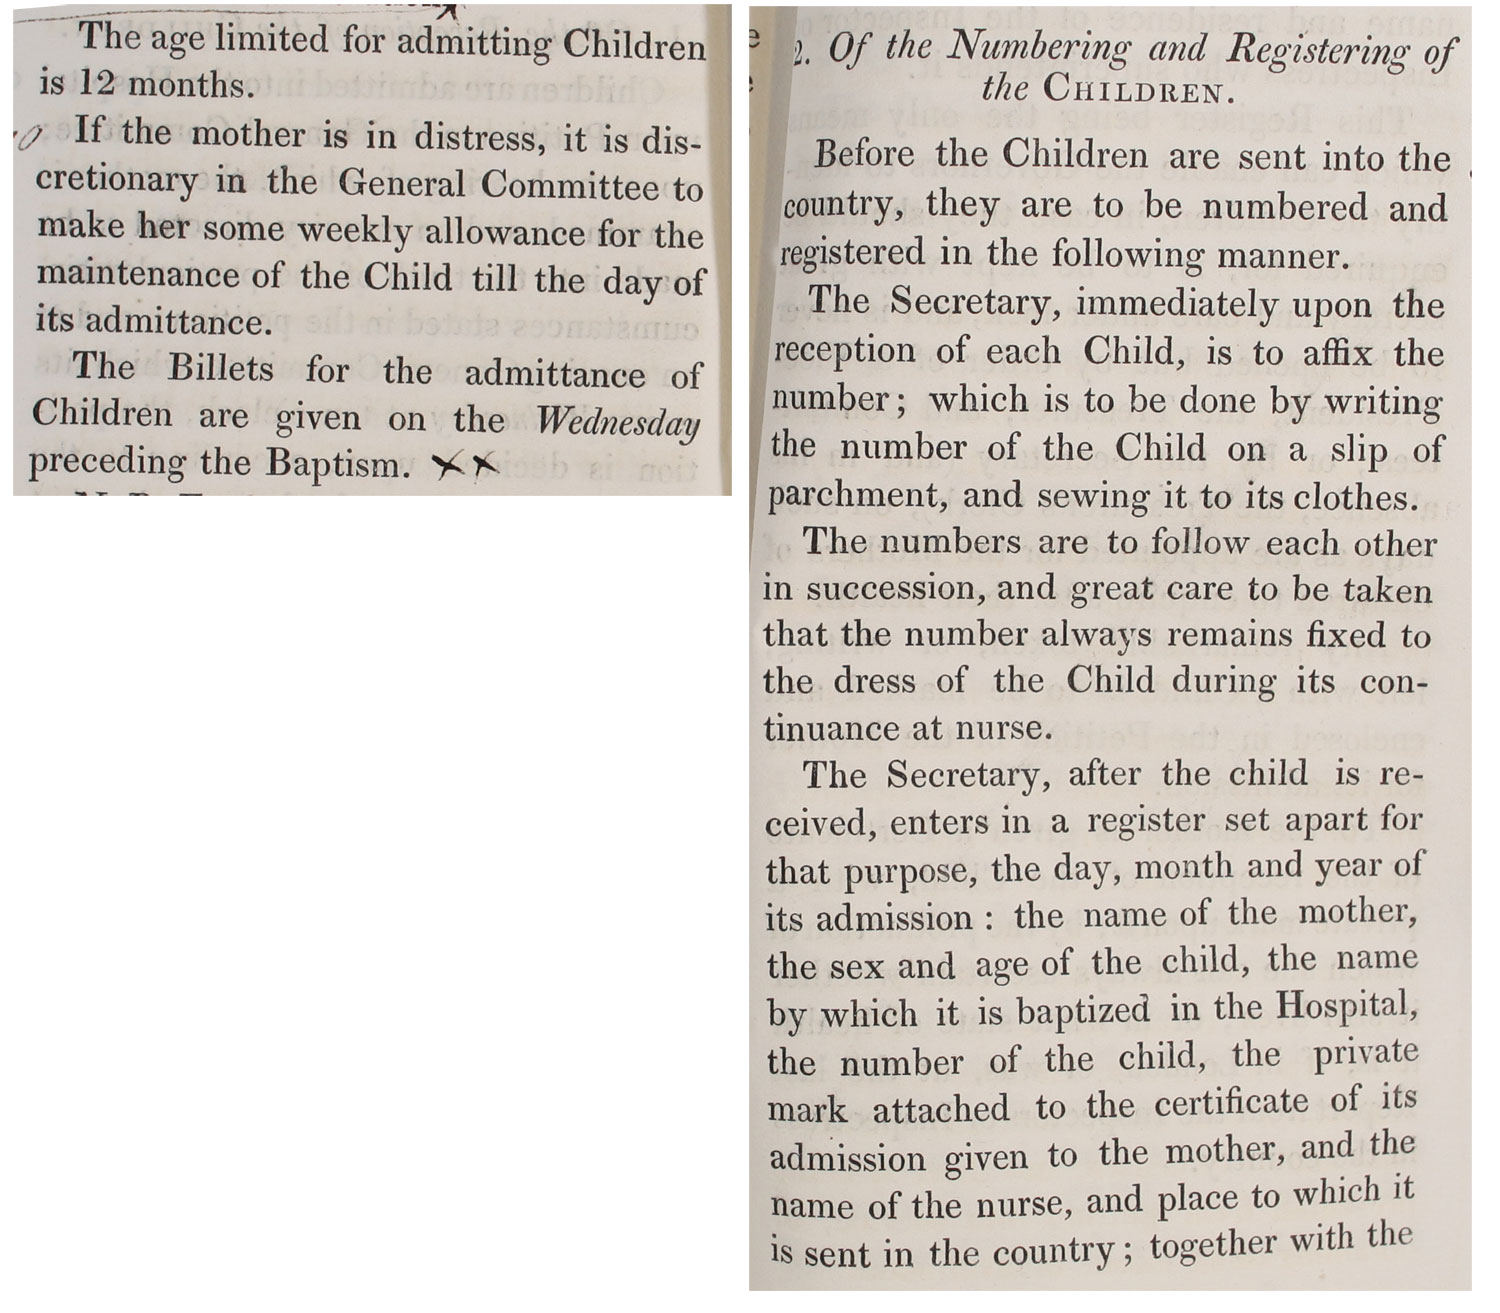 Extracts from the 'Regulations for Managing the Hospital' (CHAR 2/384)